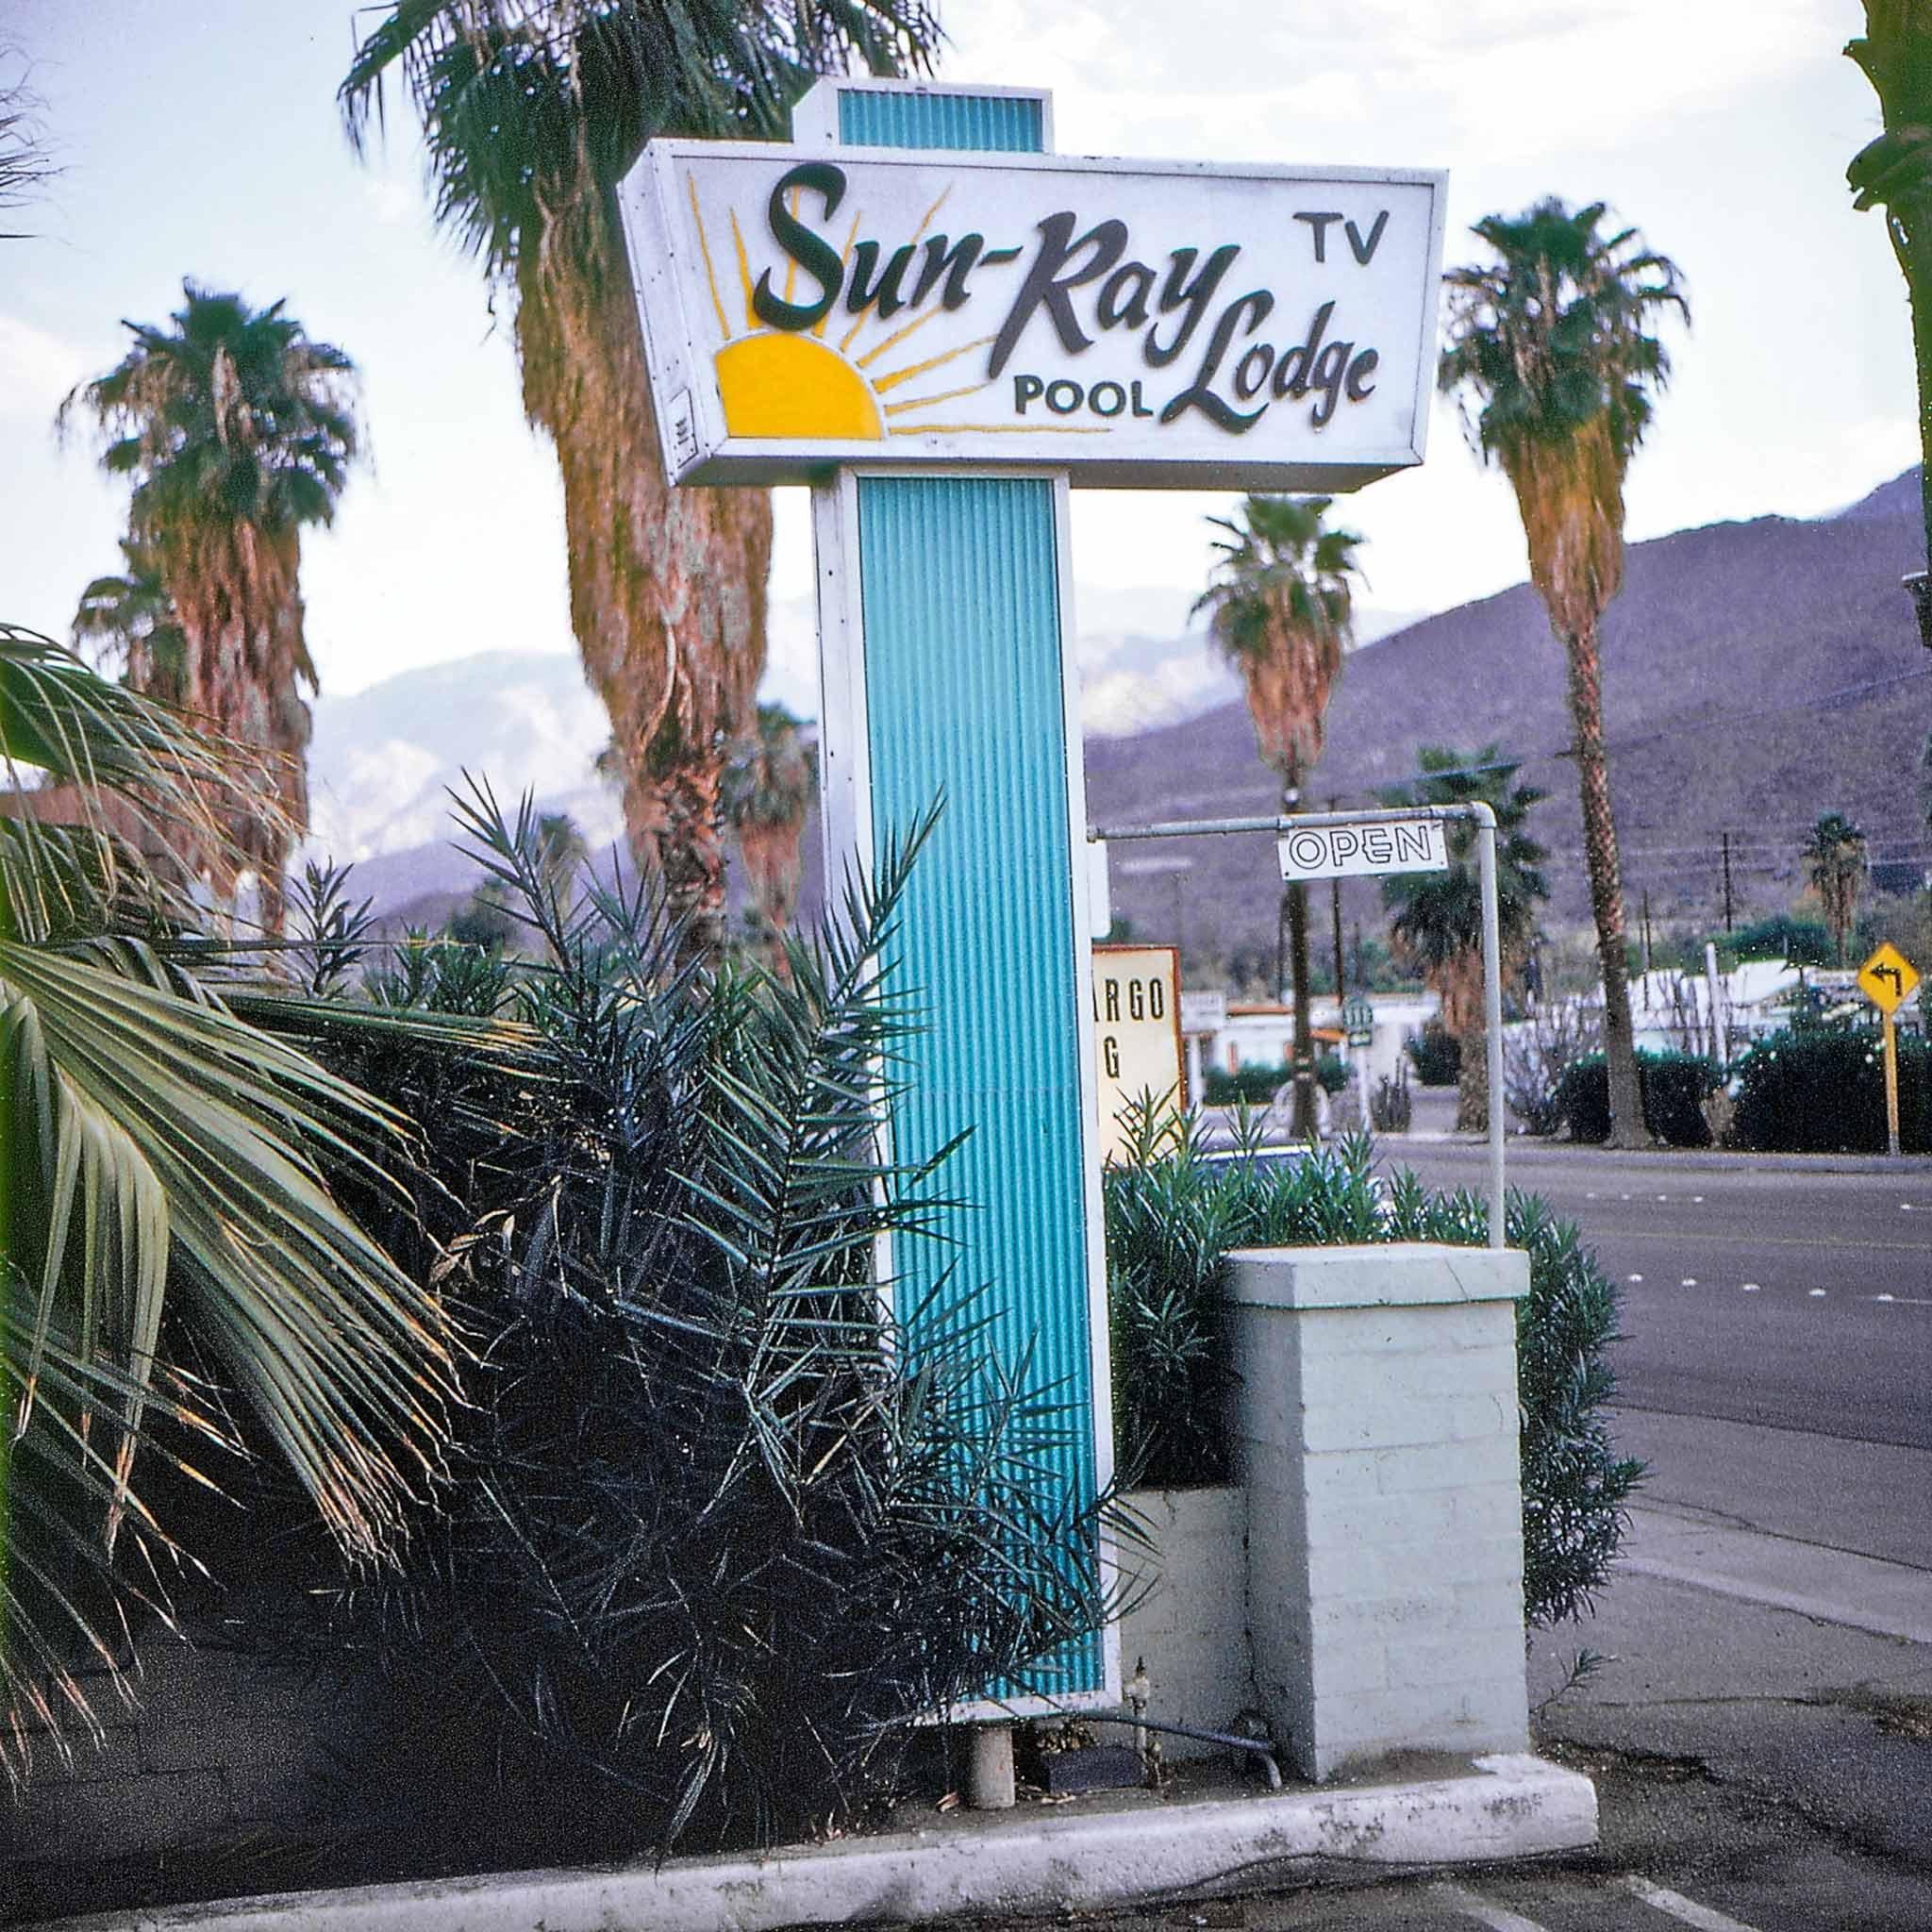 A sign that says "Sun-Ray Lodge" with Palm trees in the background